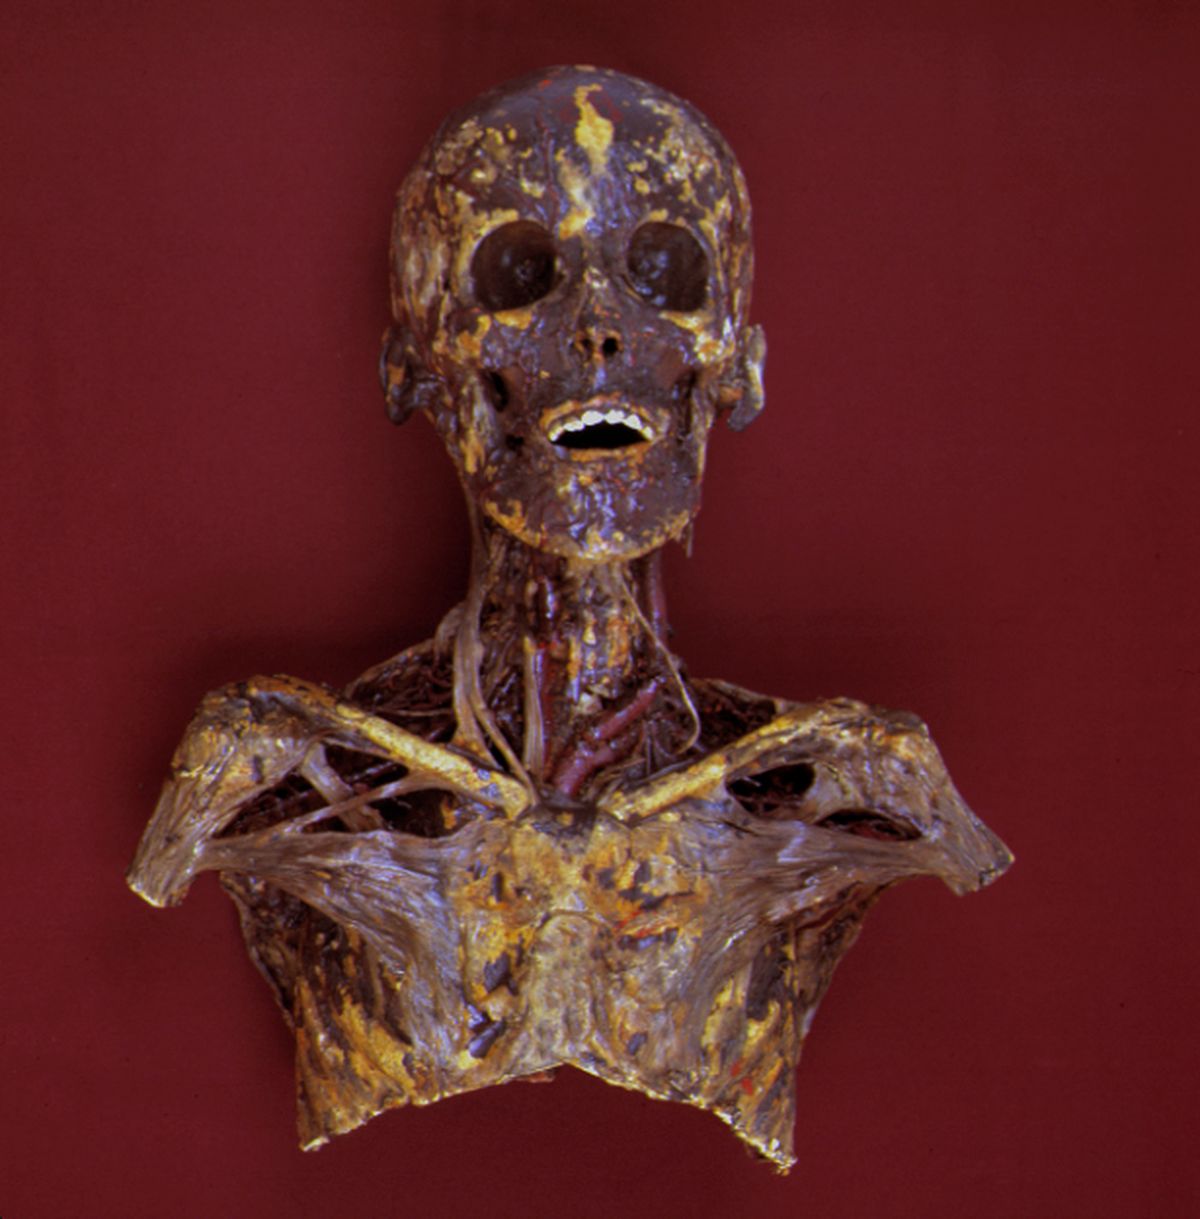 This mummy shows part of the head, the neck and the shoulder area, with an emphasis on the anatomy of the neck area.